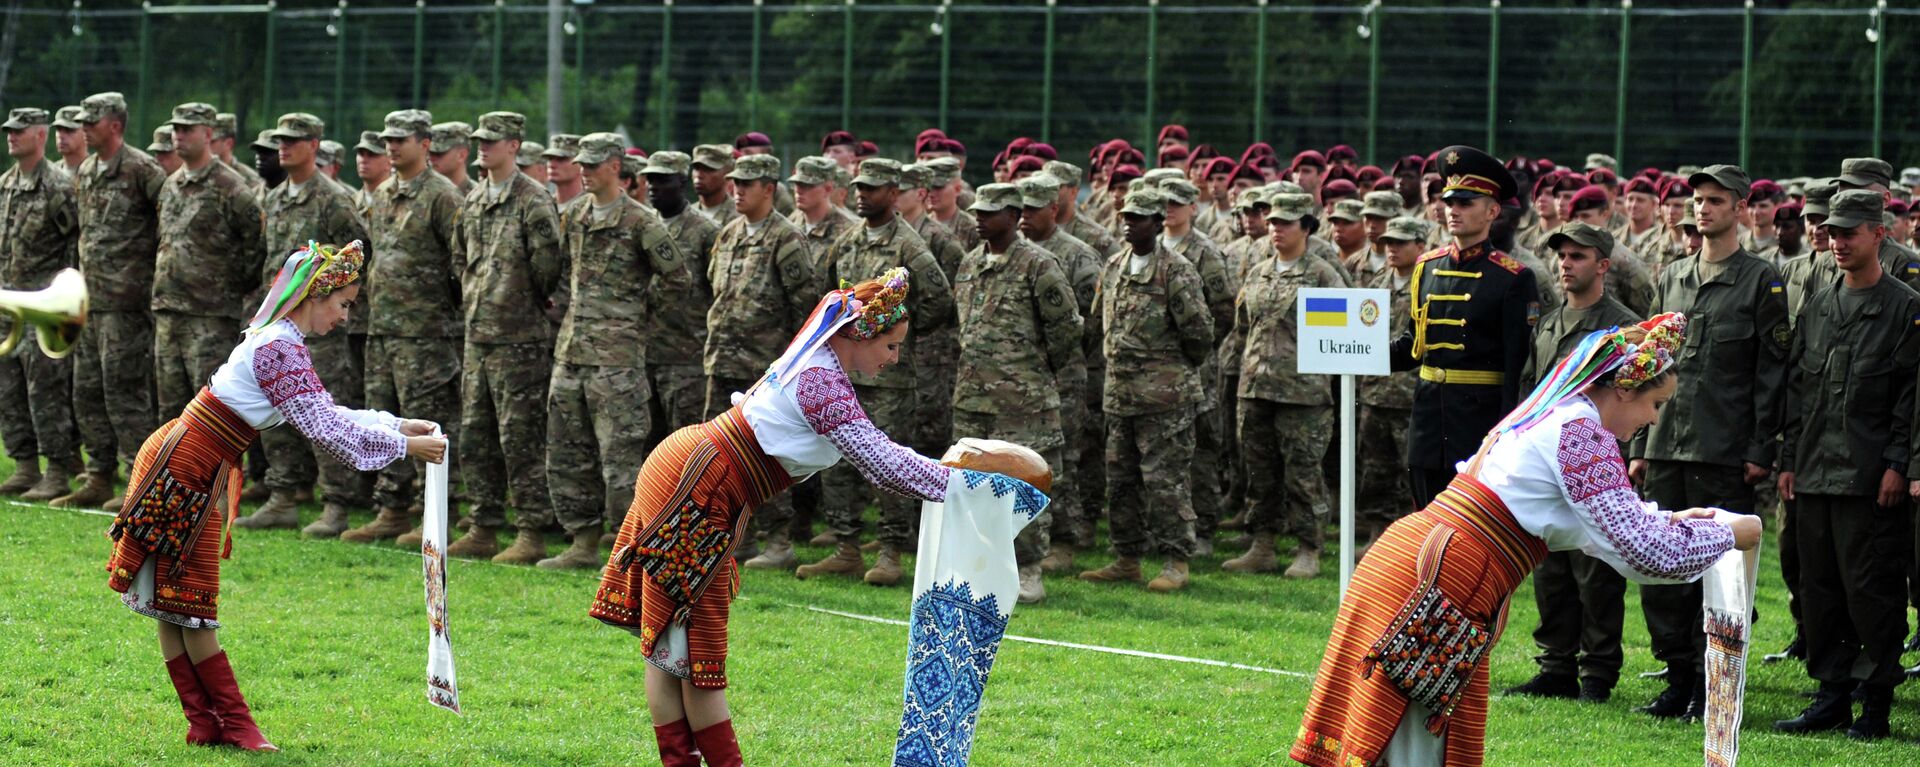 Ukrainian folk dancers perform for Ukrainian and US servicemen in a ceremony for joint-drill exercises between the two countries in Yavoriv polygon, Lviv district, western Ukraine on 20 July 2015 - Sputnik International, 1920, 07.06.2021